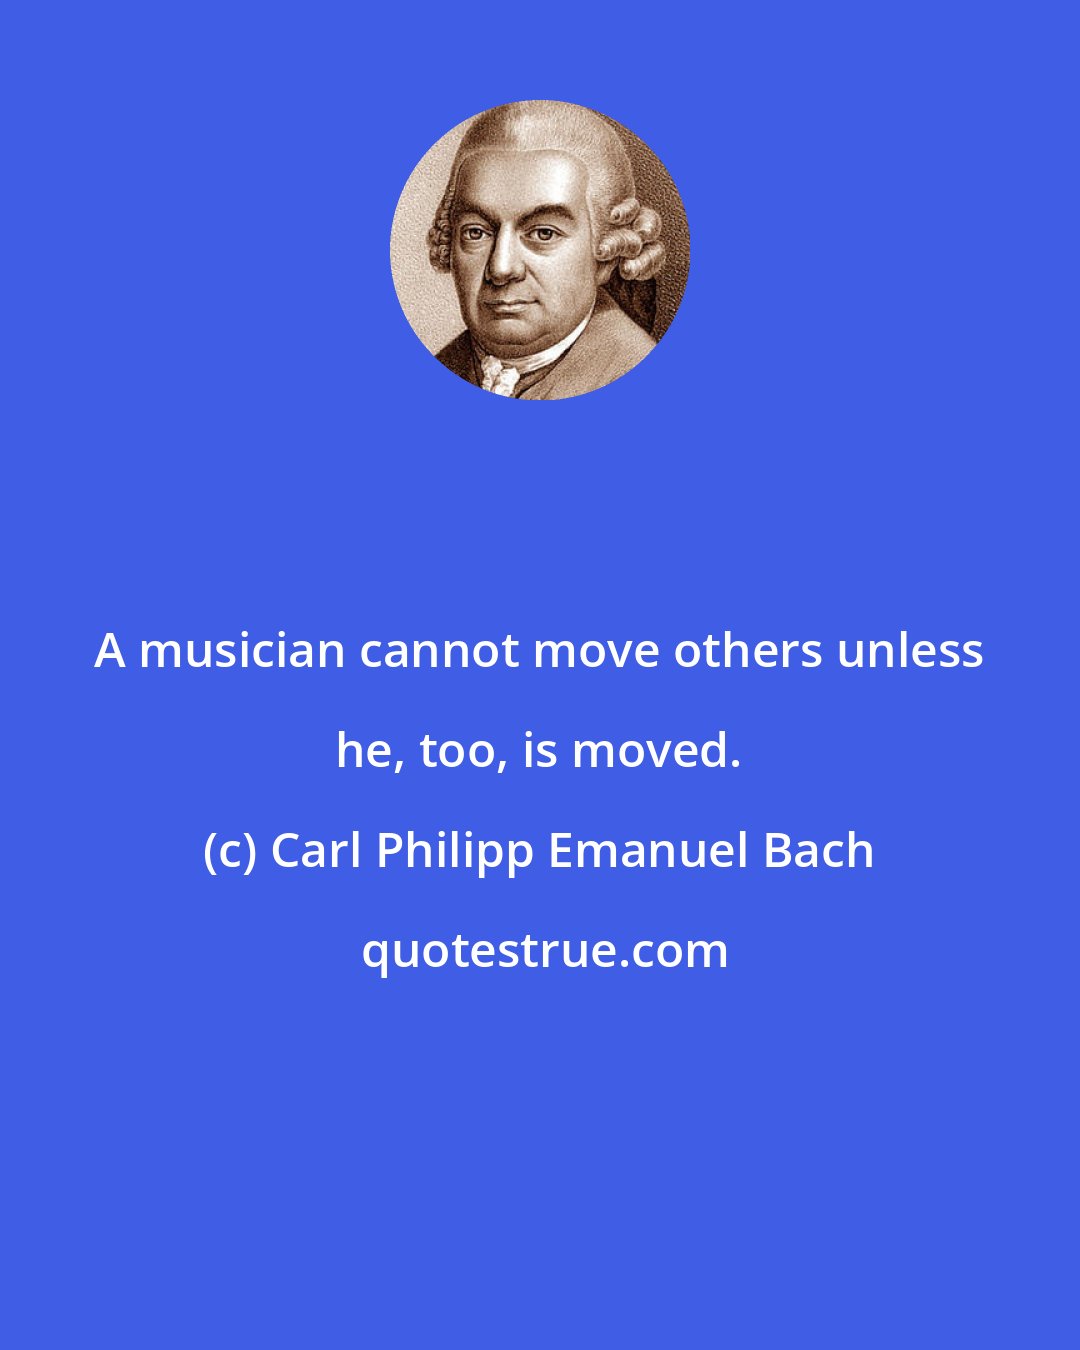 Carl Philipp Emanuel Bach: A musician cannot move others unless he, too, is moved.